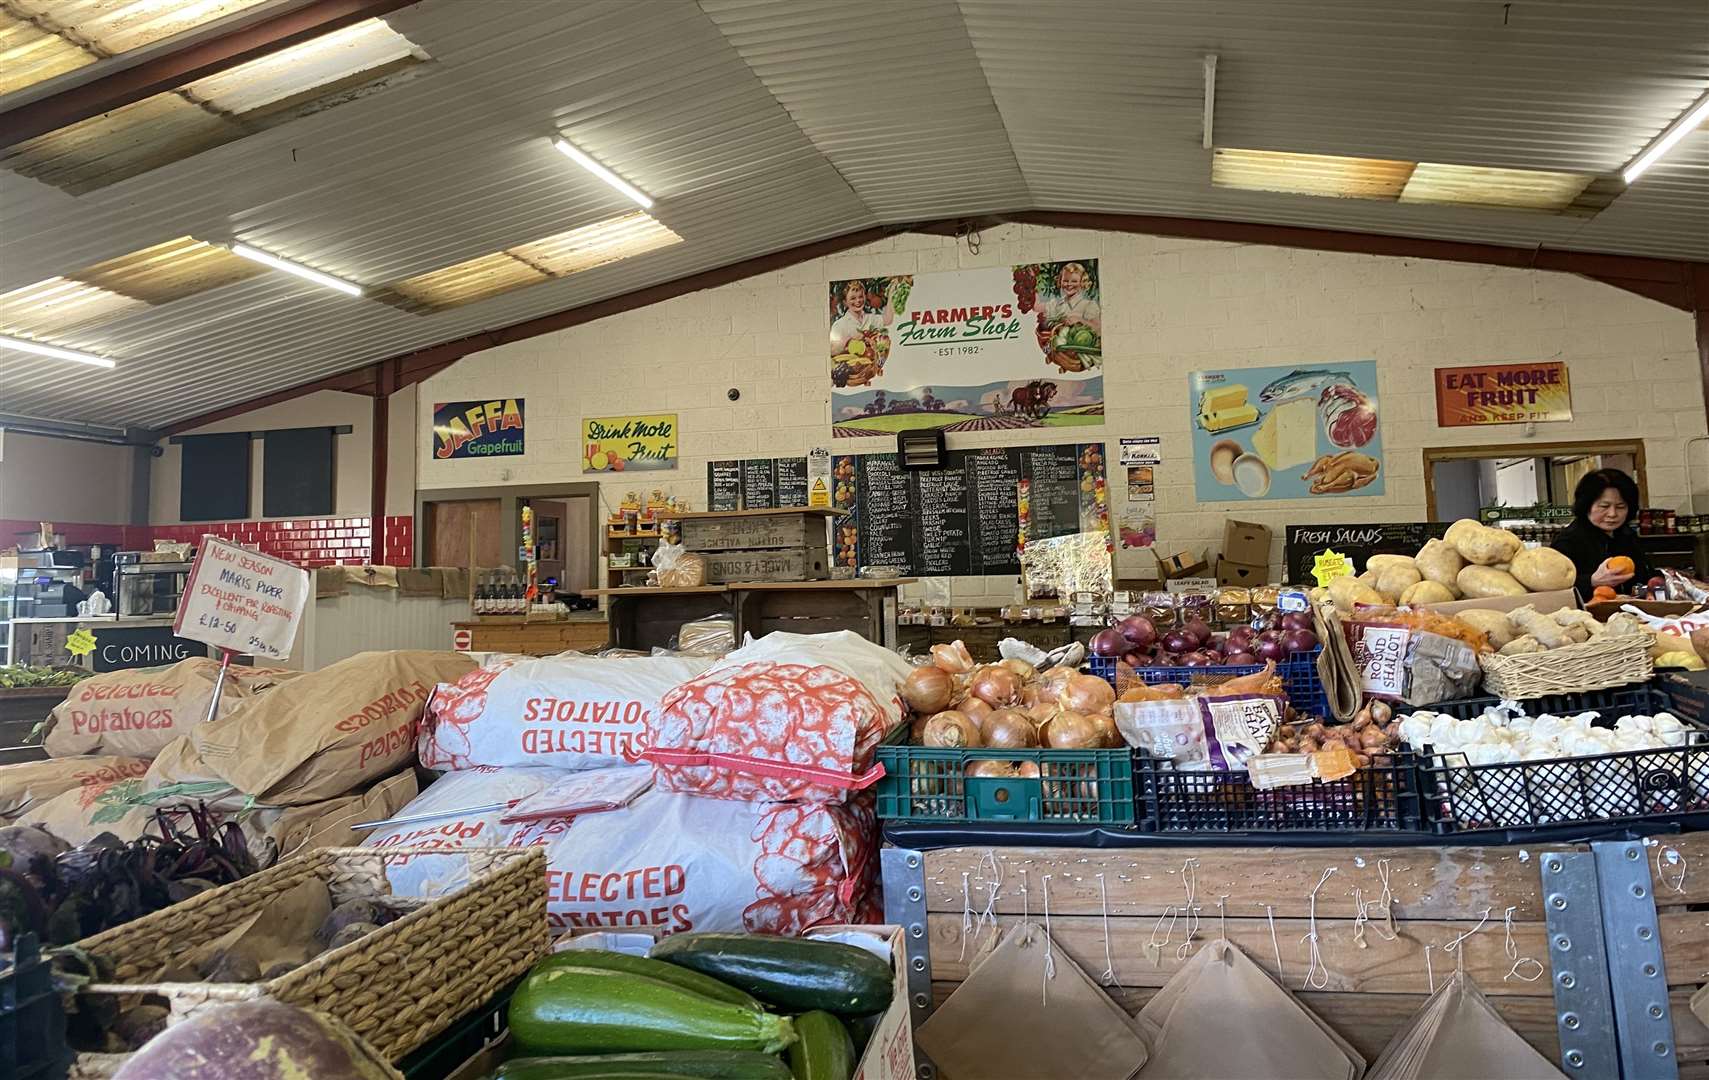 Inside the farm shop, which had a friendly atmosphere